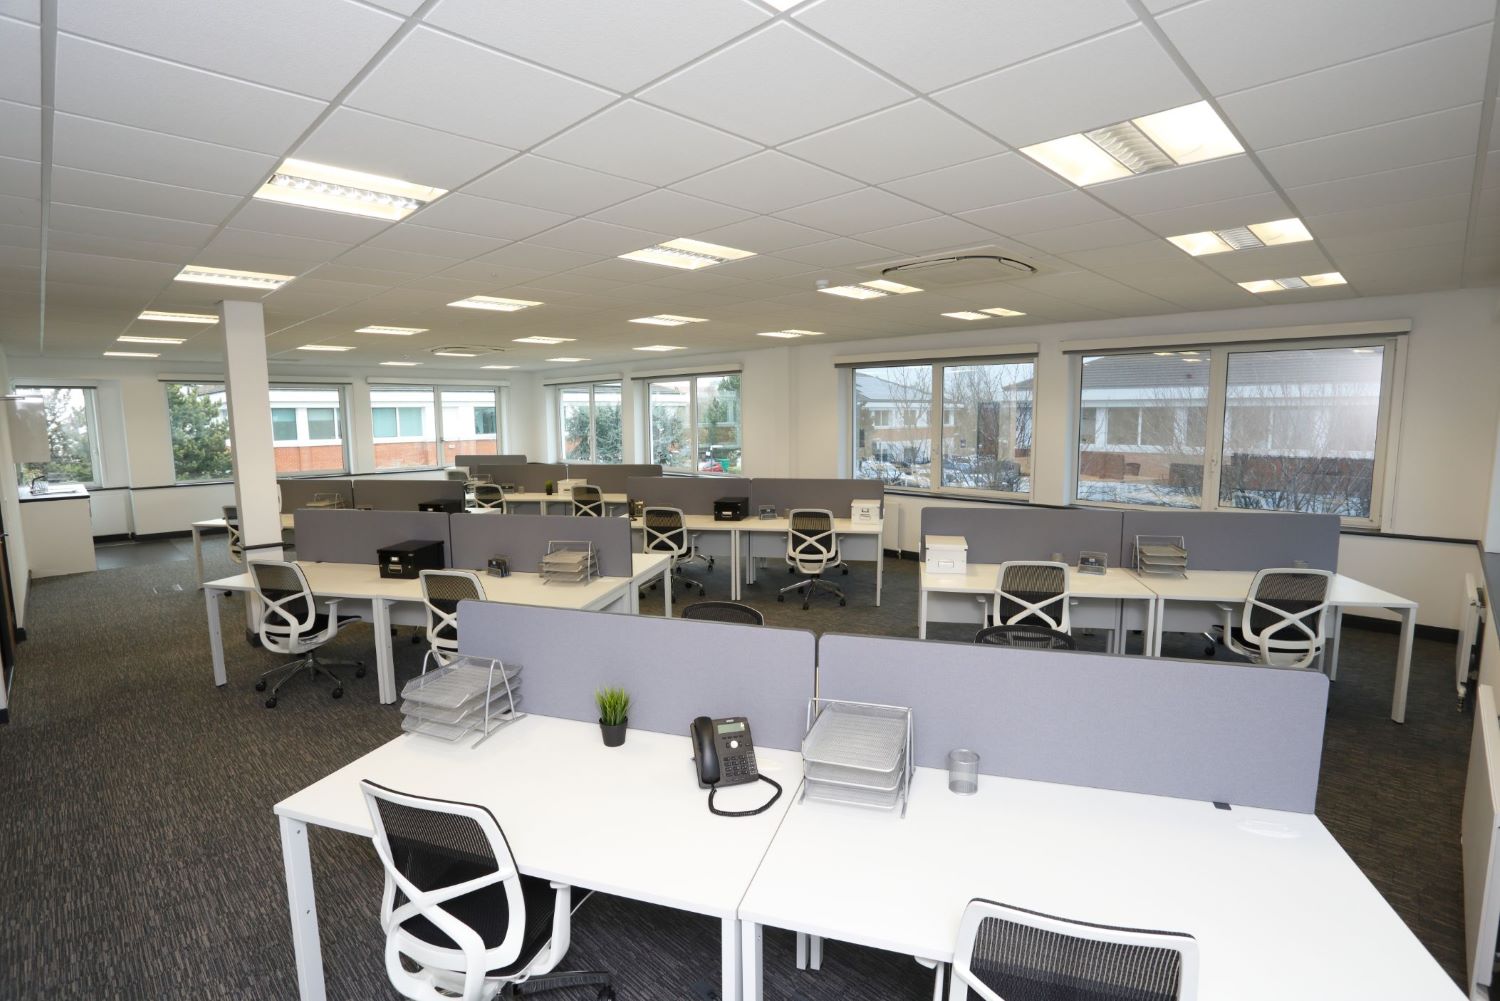 Rent serviced office space in Oxford,southern England